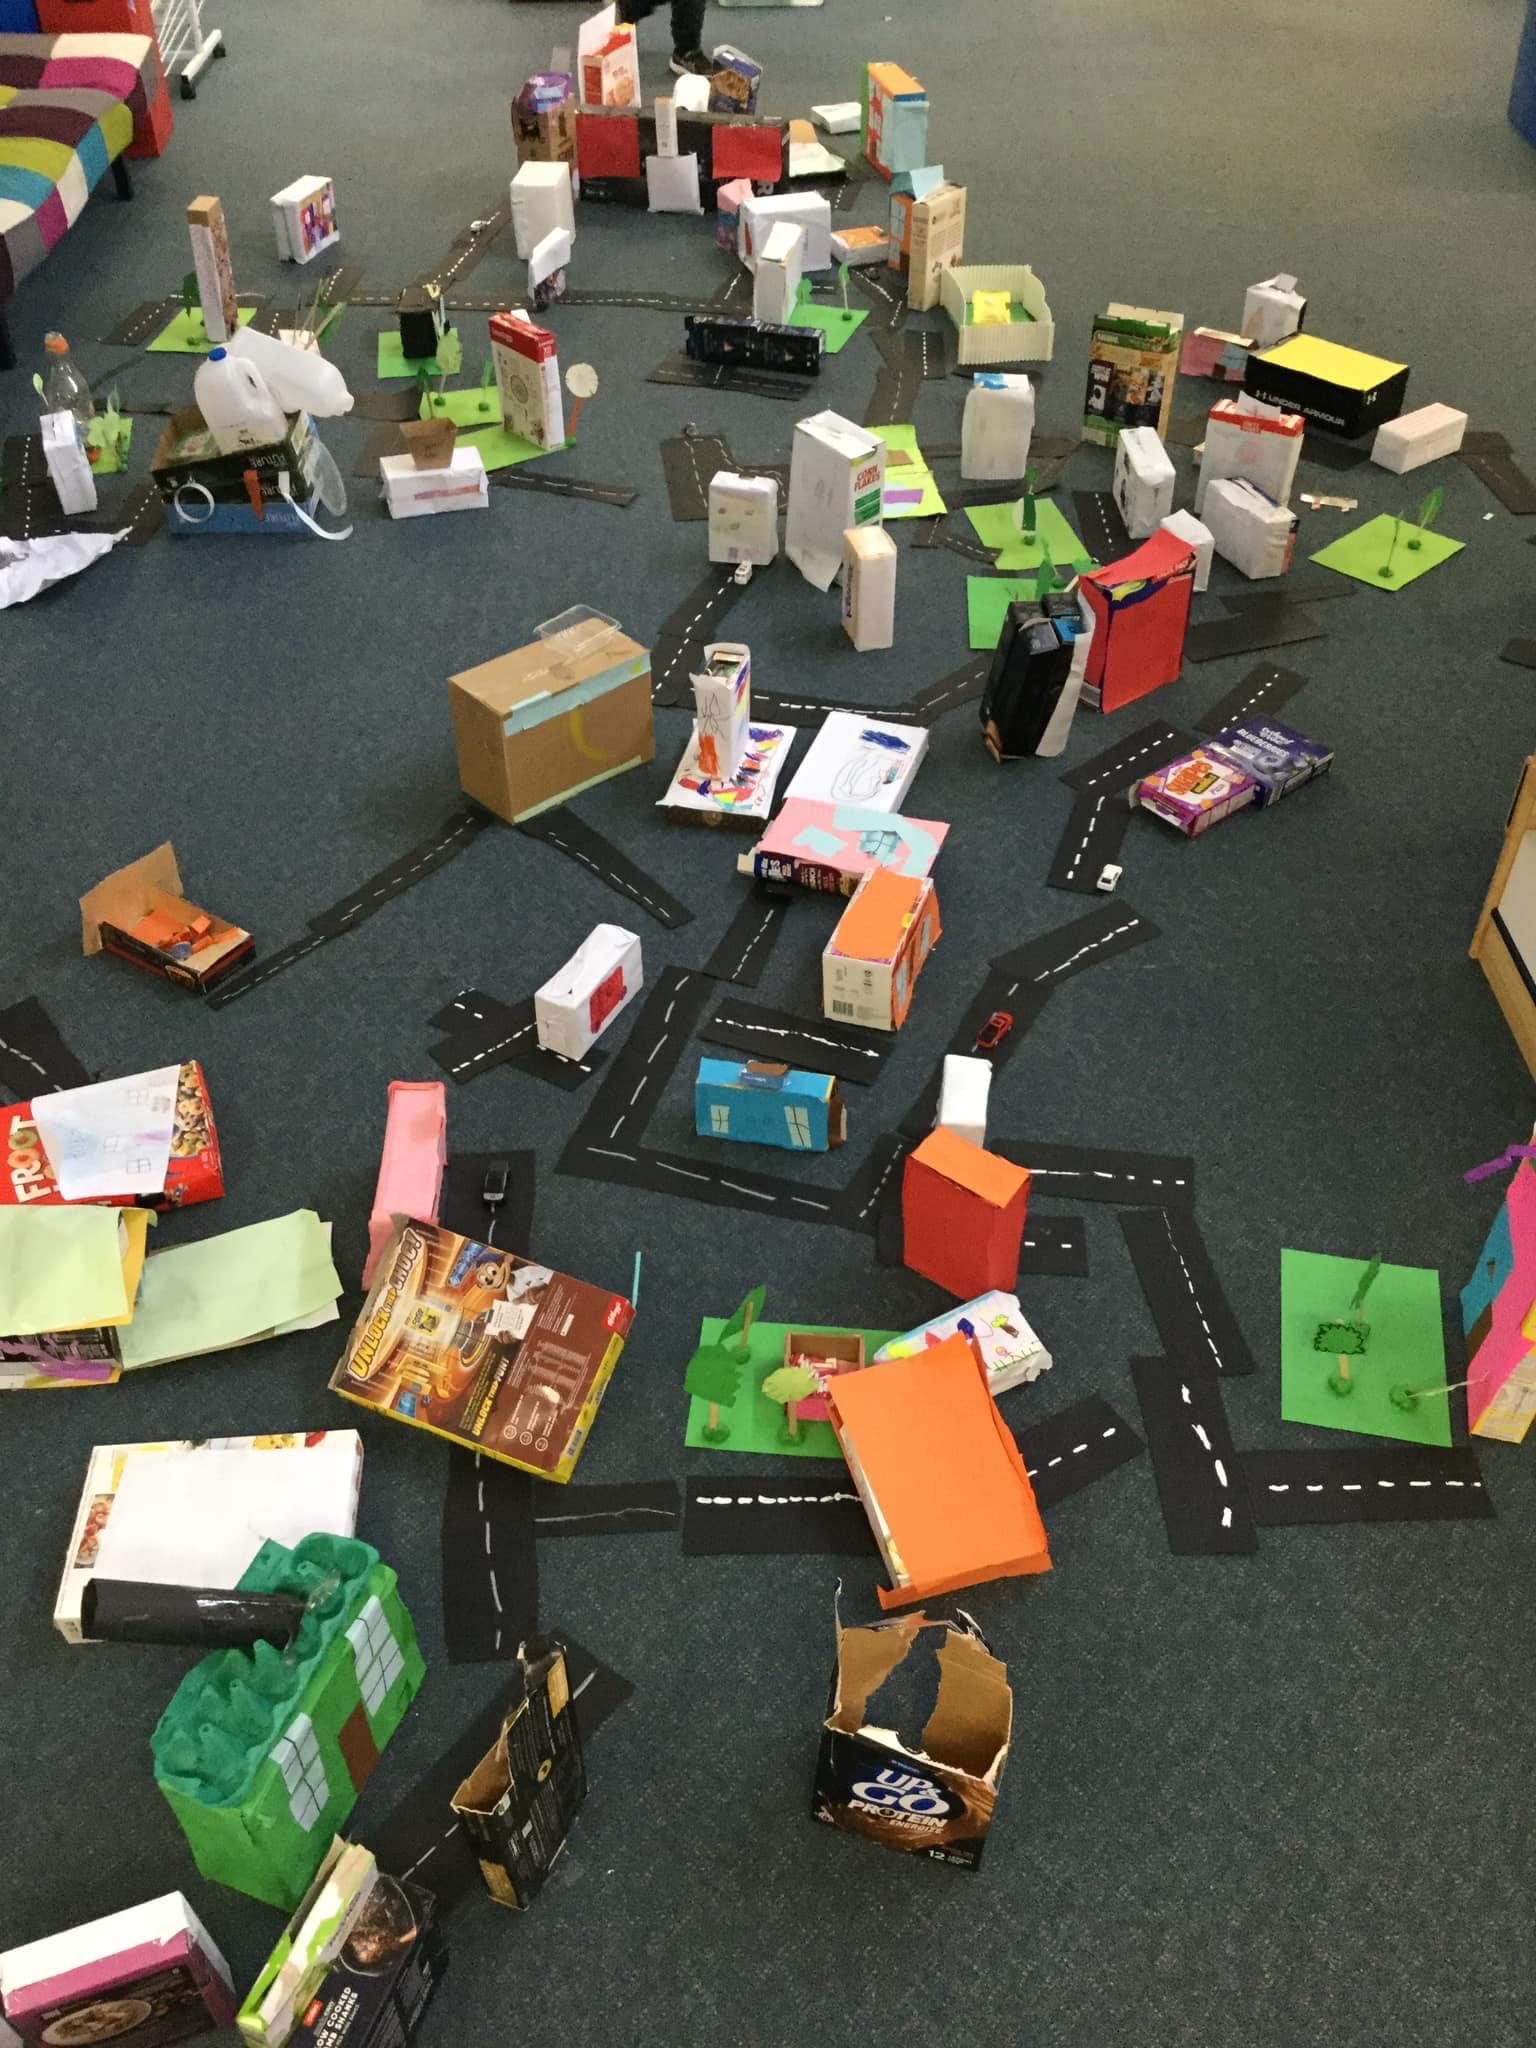 Concept Based Inquiry - Building a Community with Recyclables